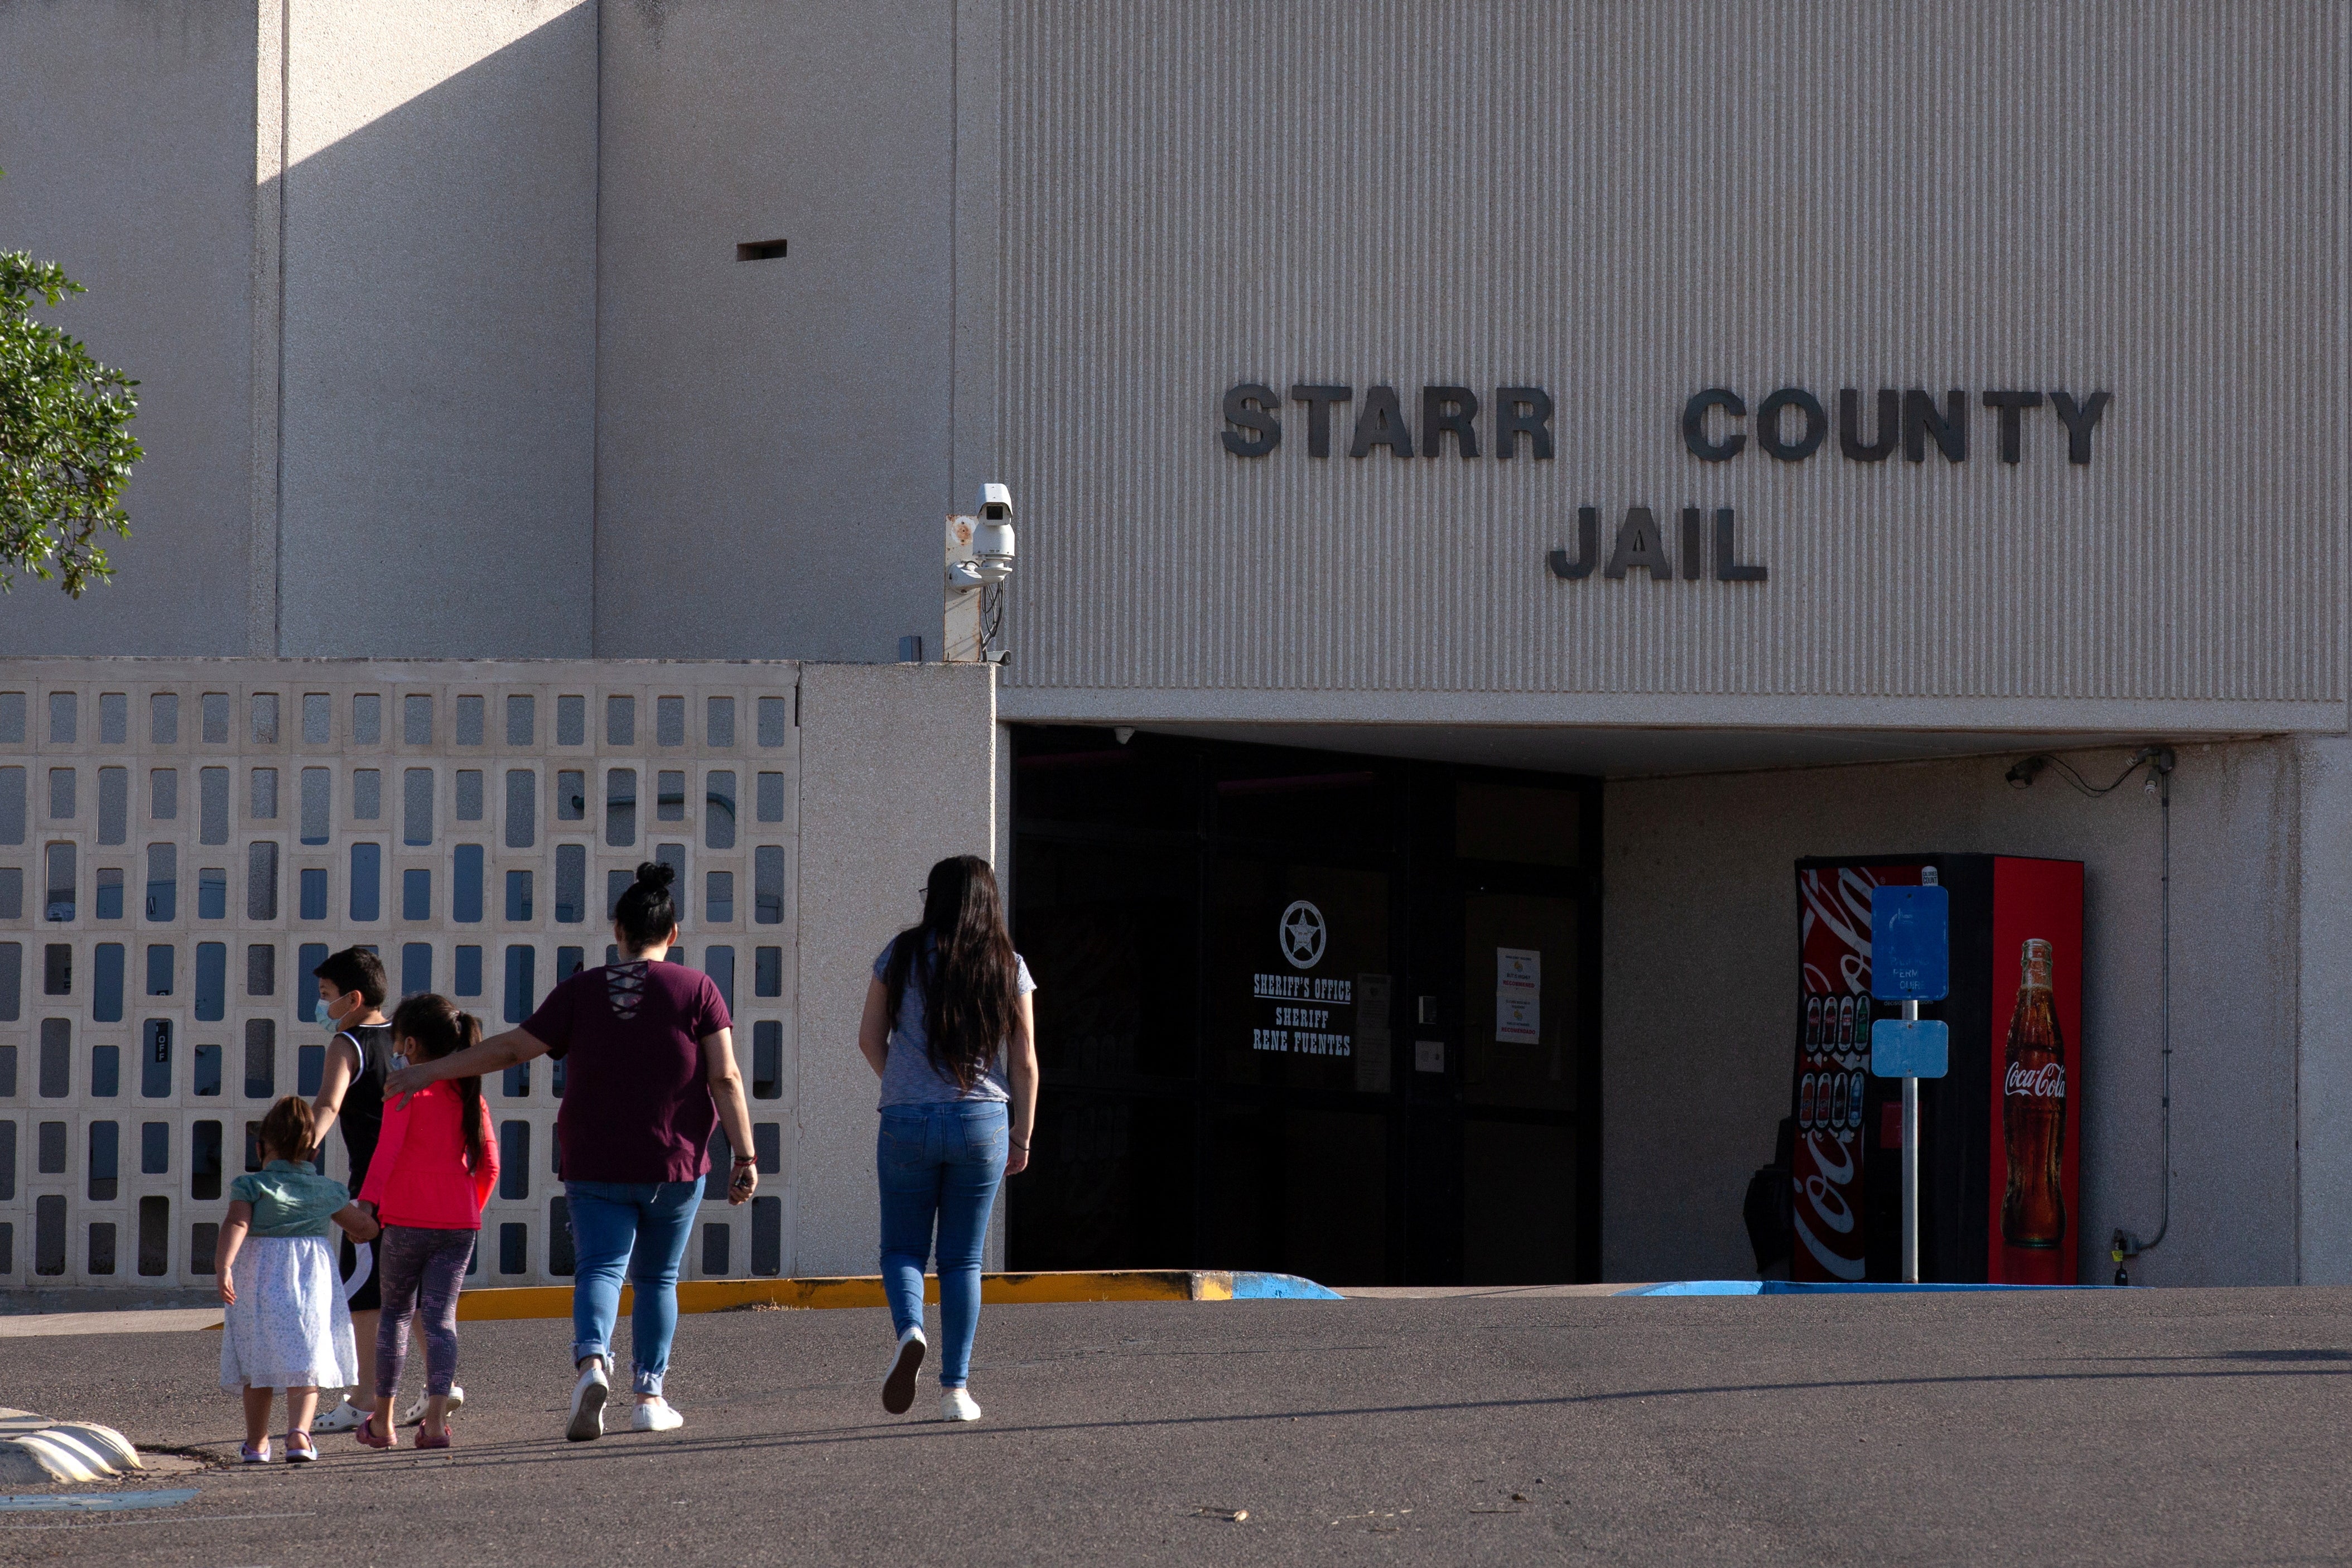 A woman and four children walk toward the entrance of a building labeled as the Starr County Jail.